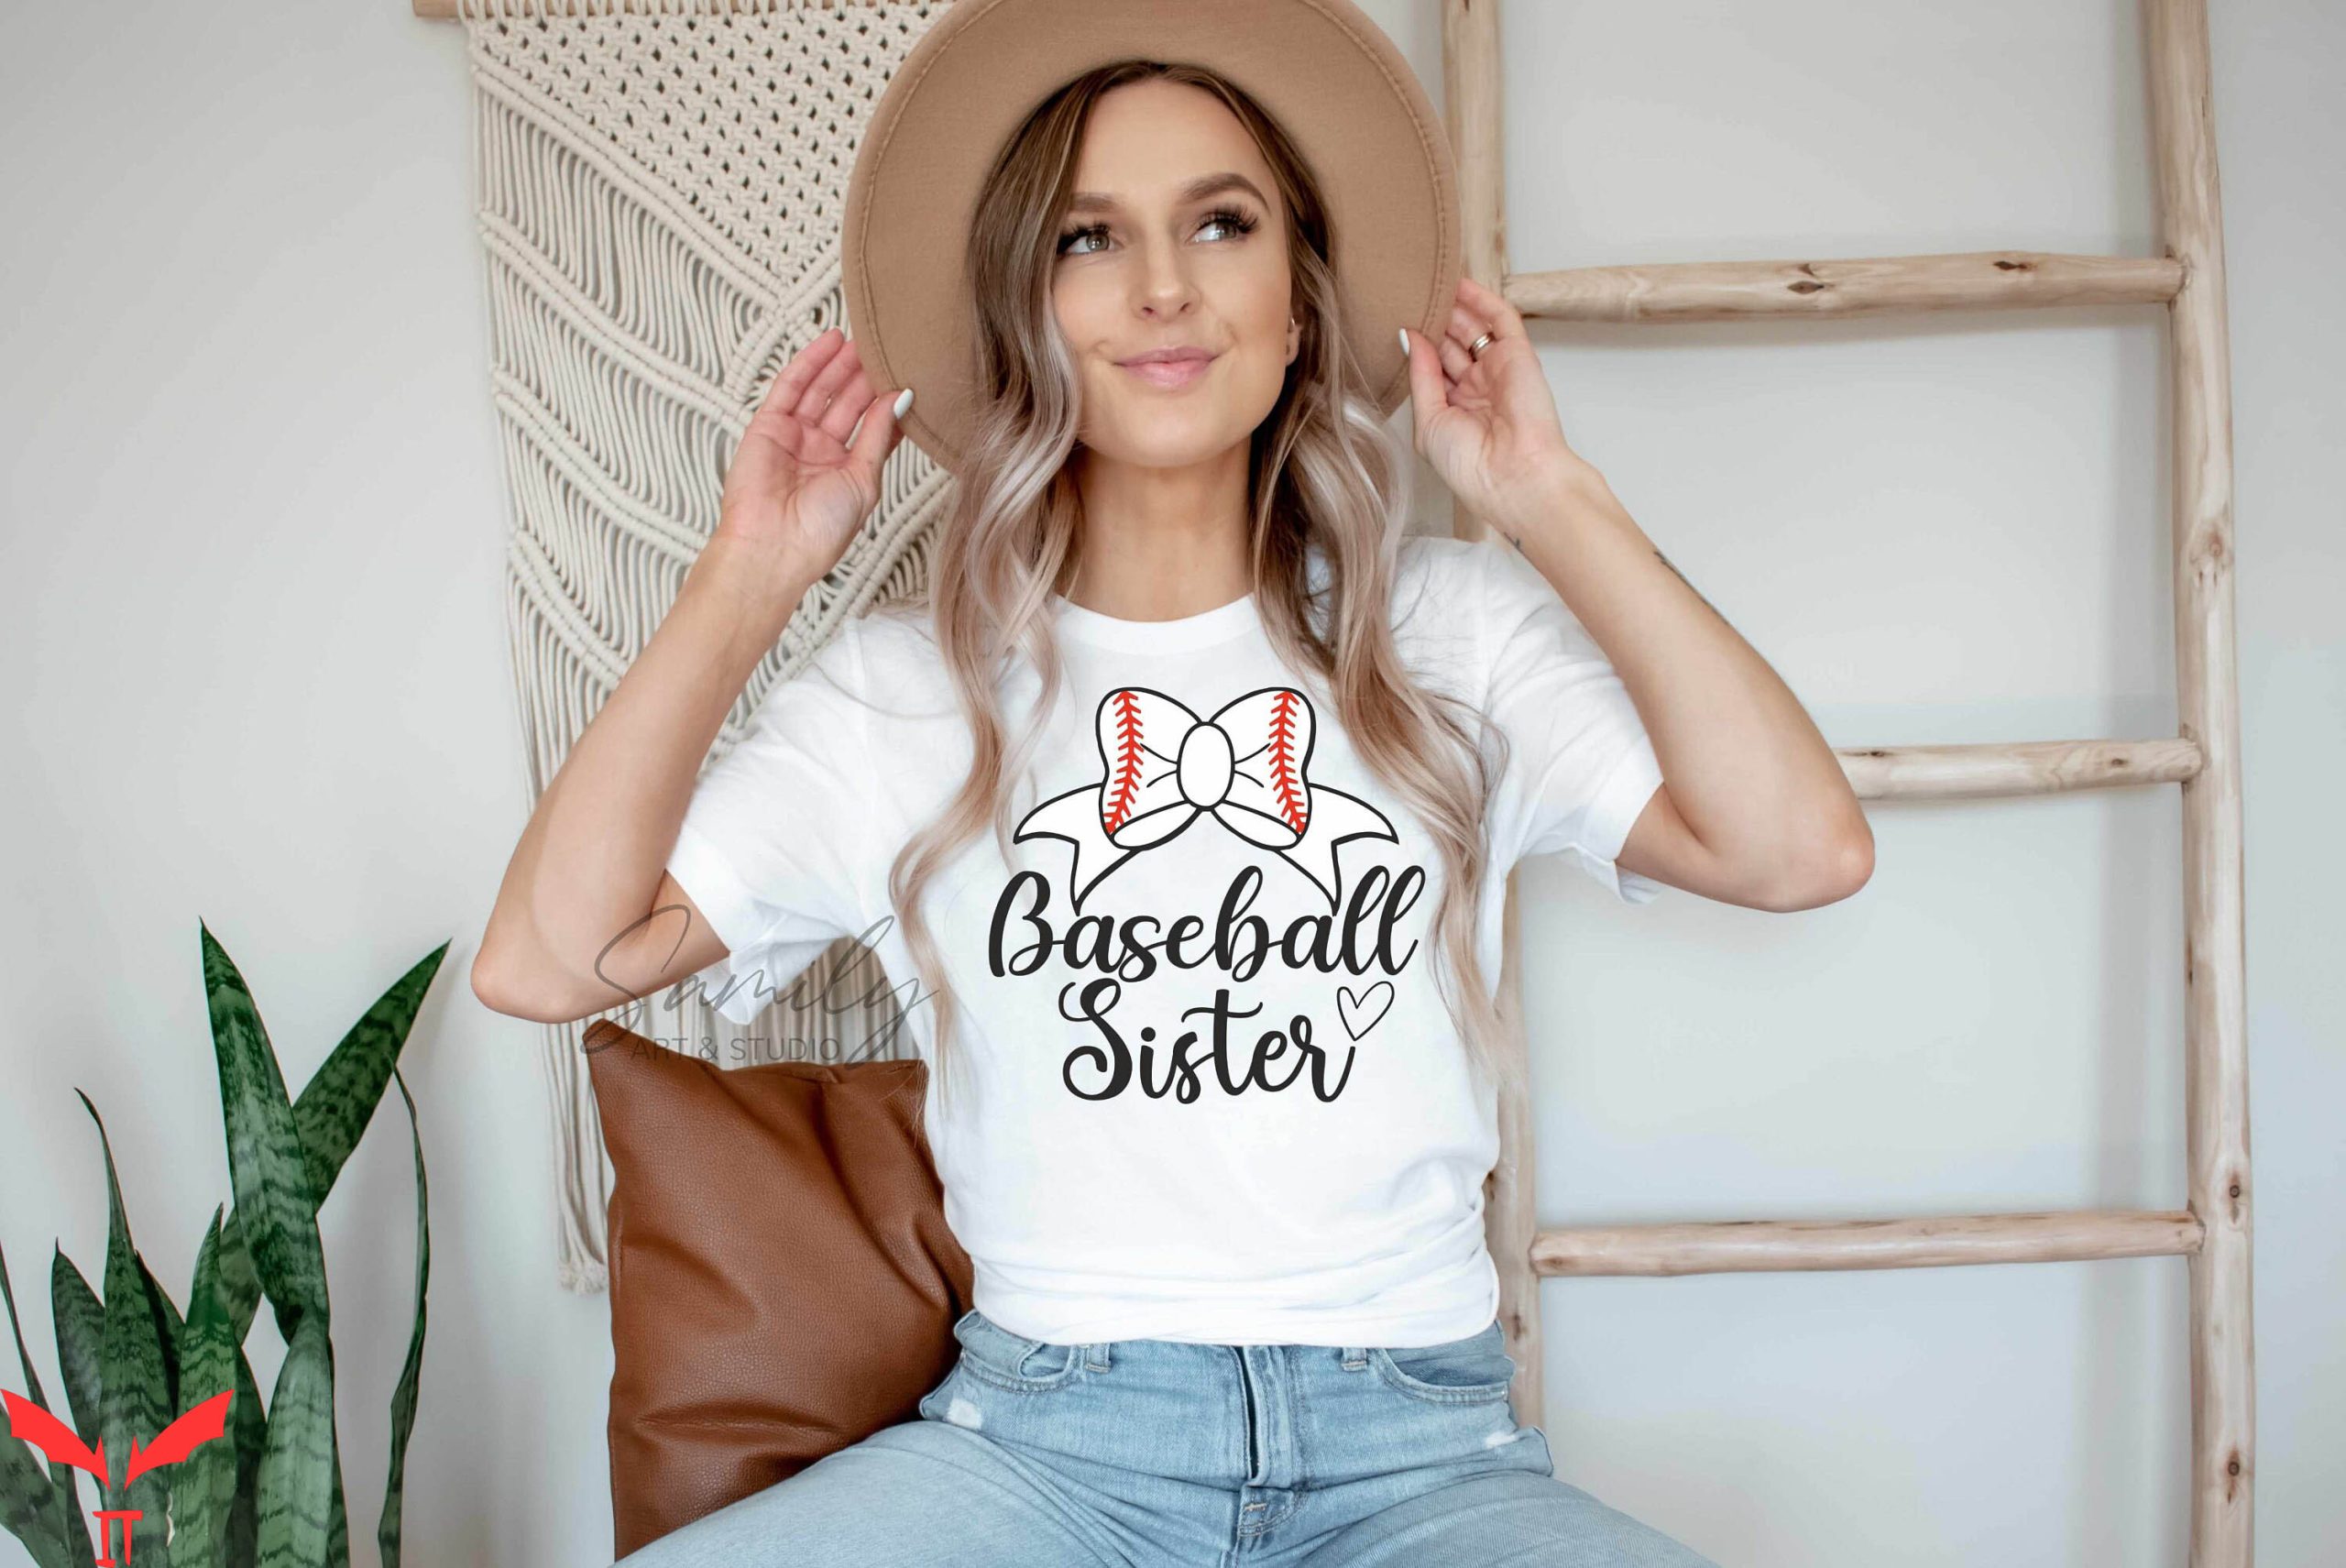 Baseball Sister T-Shirt Cute Sports Trendy Quote Funny Tee